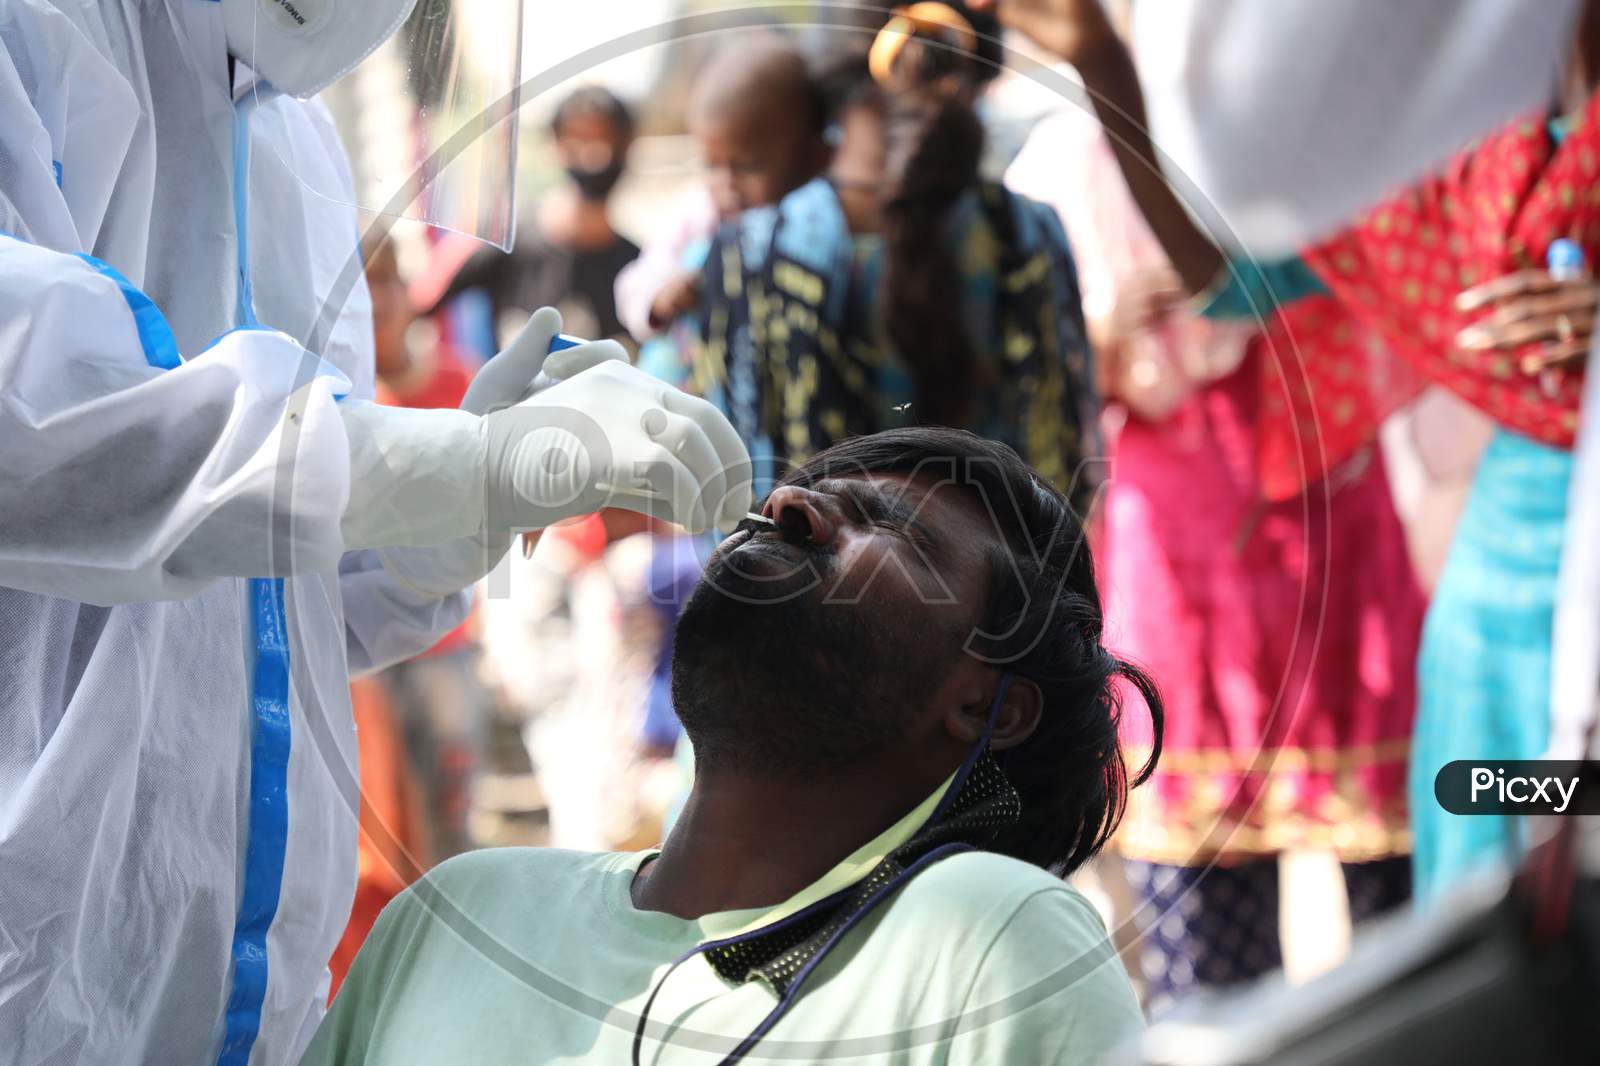 A health worker collects a swab sample from a man  for Covid-19 testing in Maratha Basti, Jammu on July 16, 2020